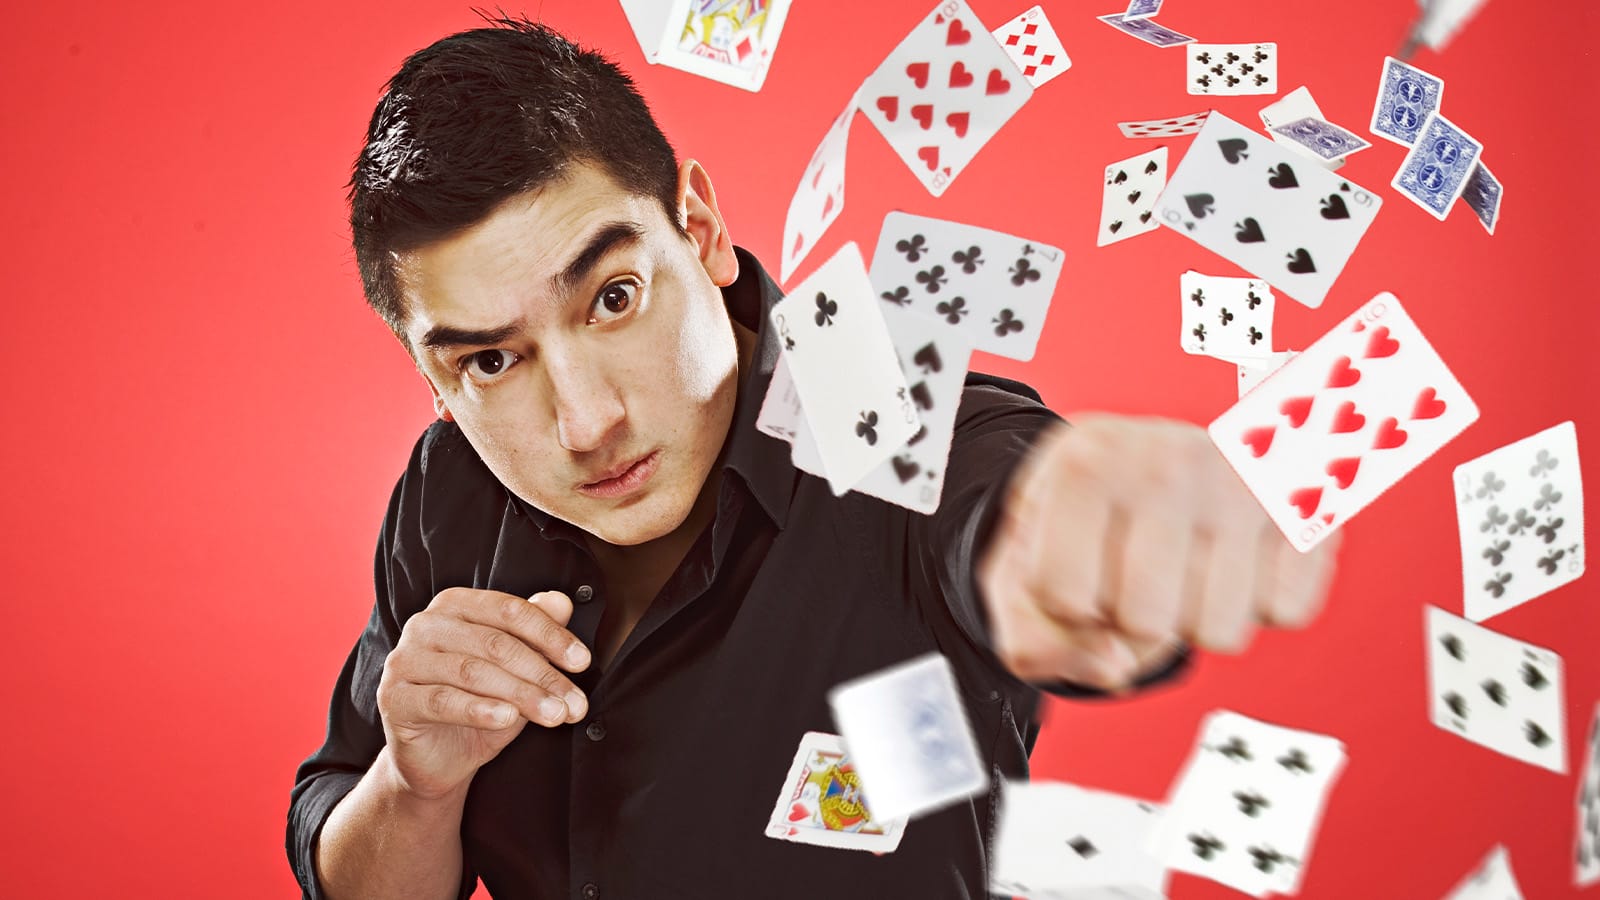 A man punches through a load of flying playing cards